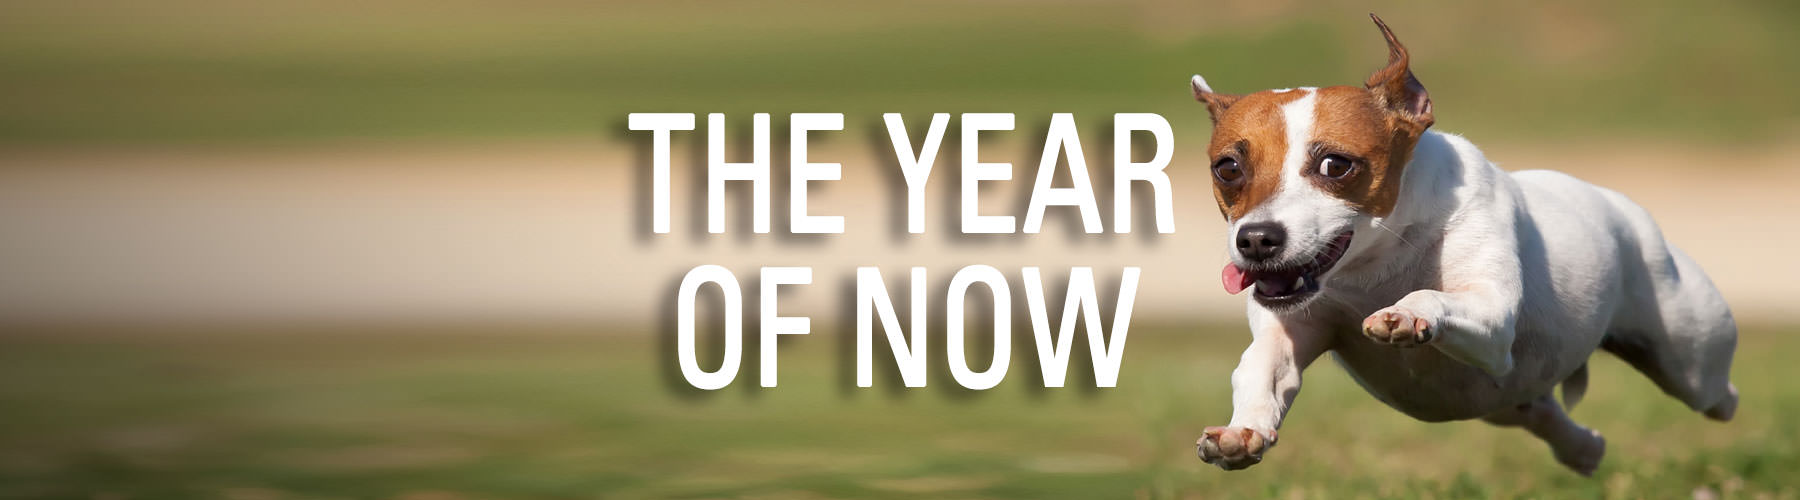 The Year of Now